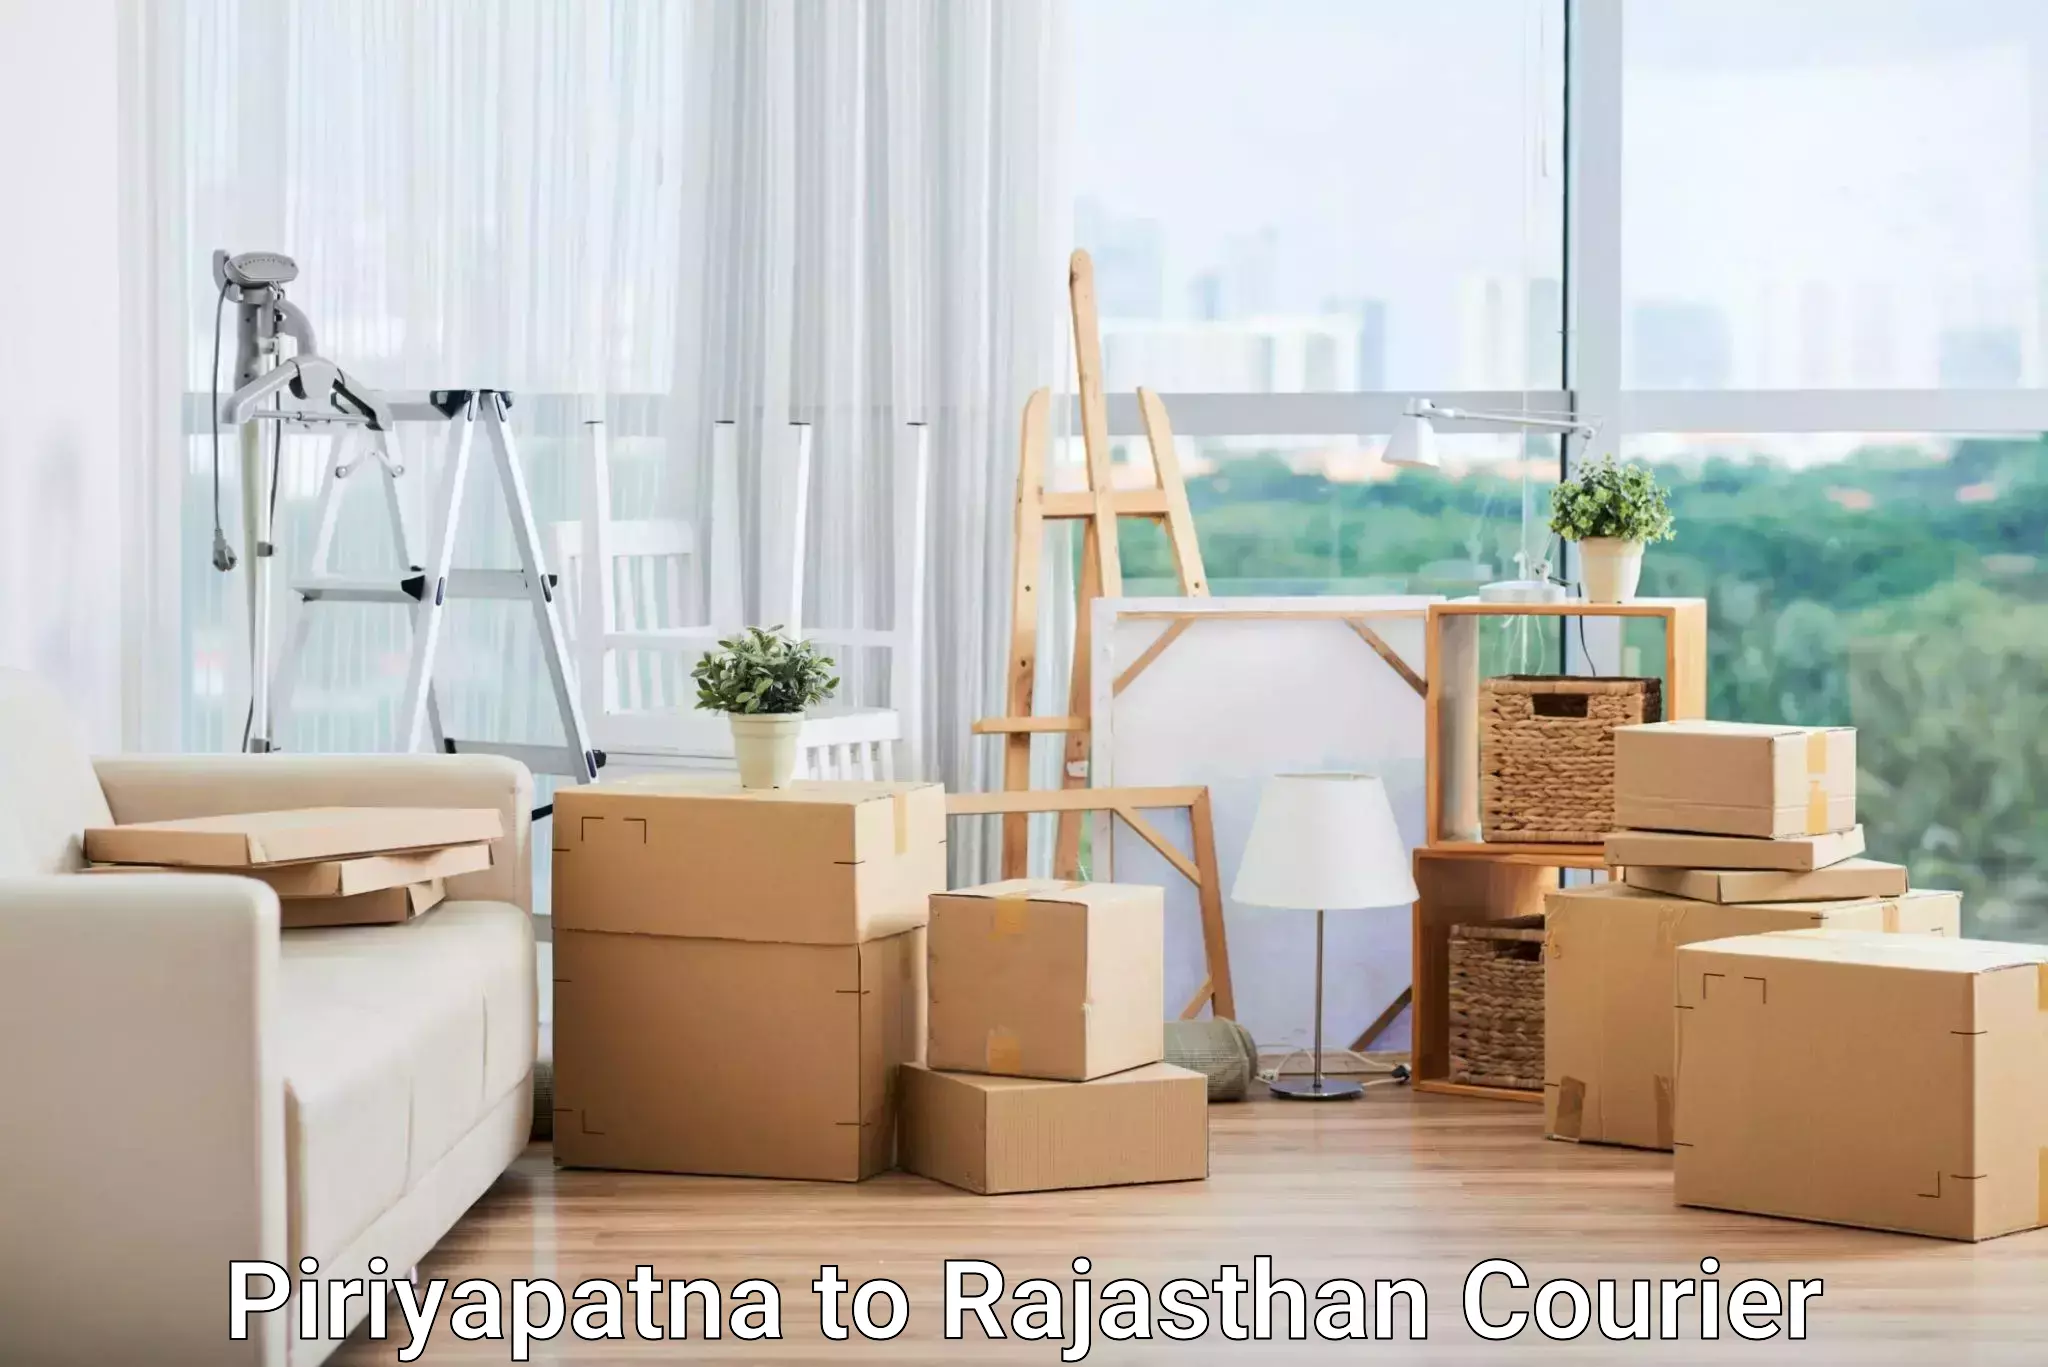 Local delivery service Piriyapatna to Rajasthan